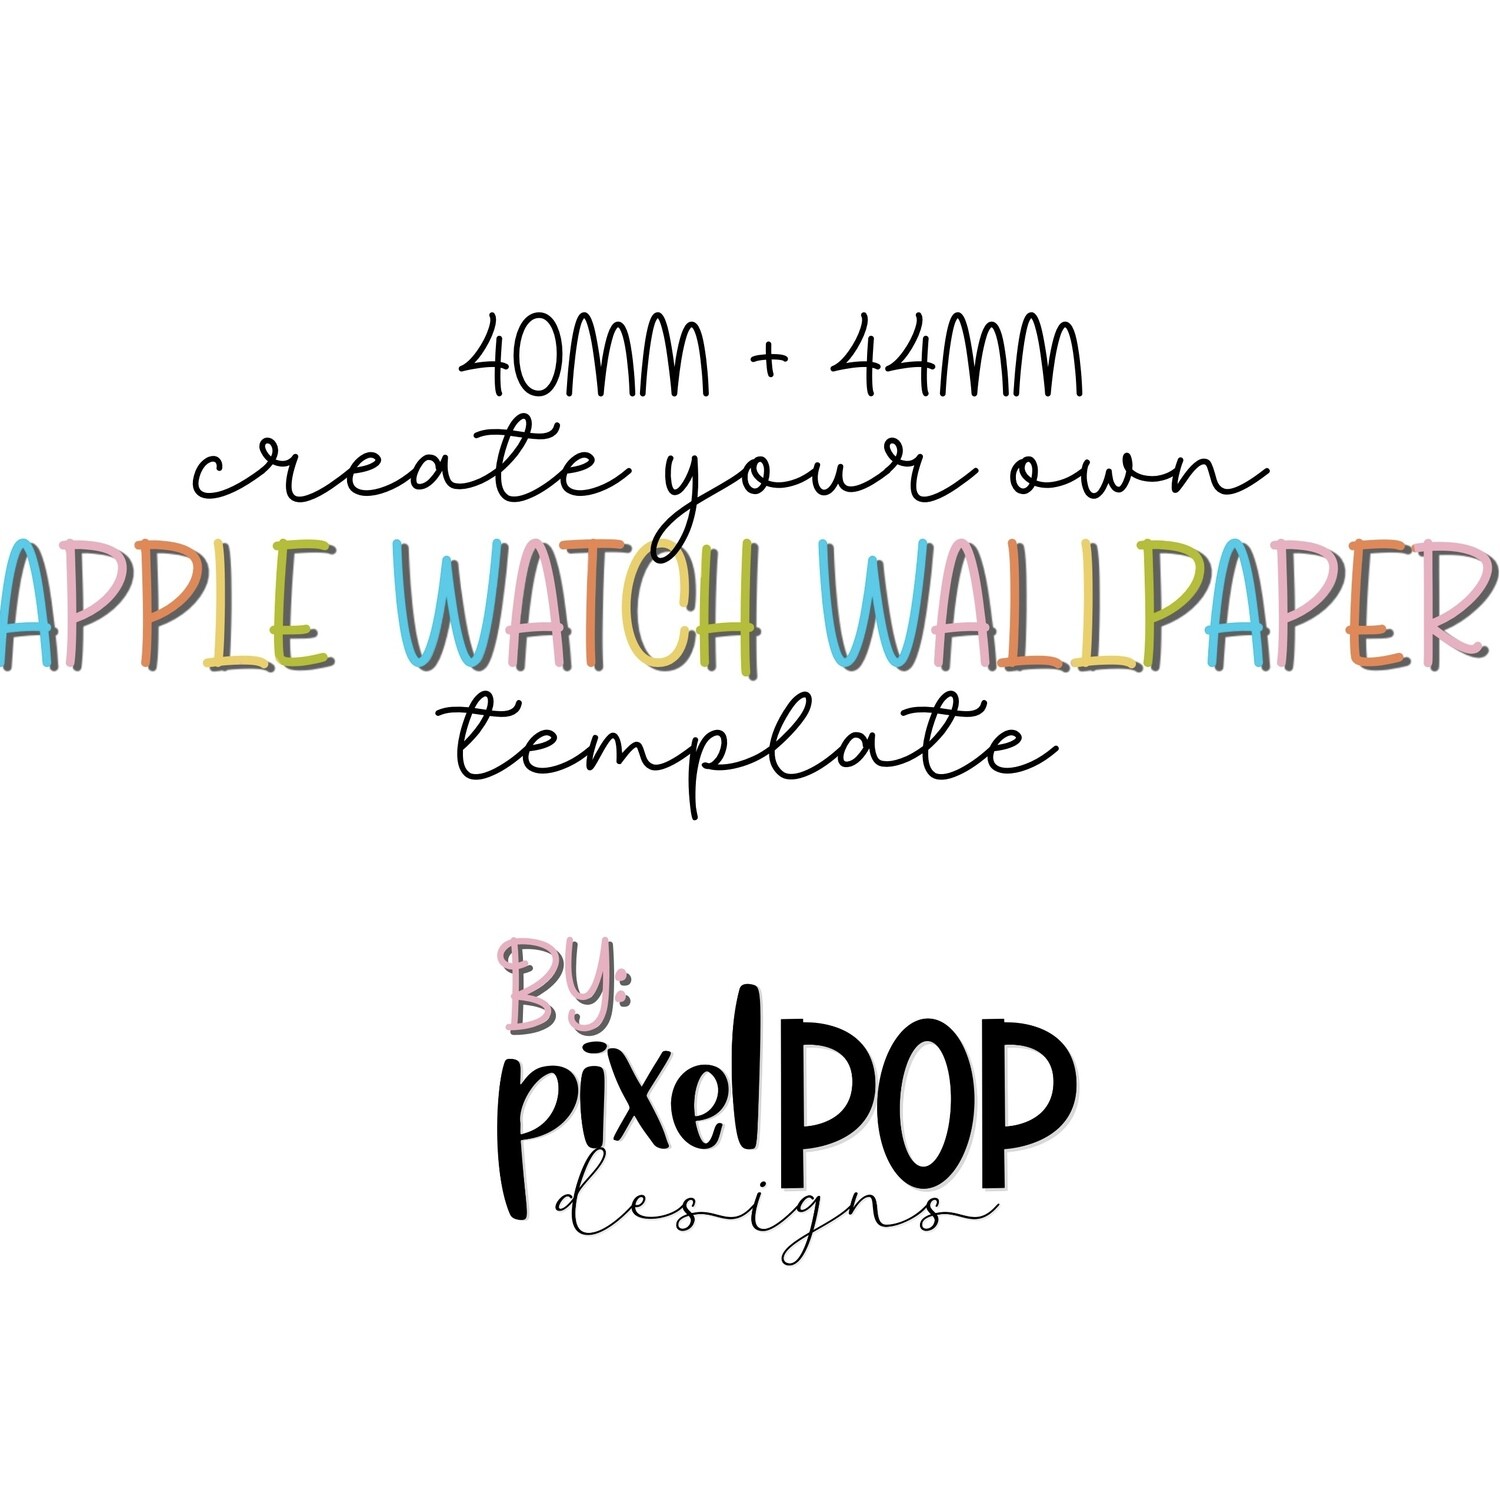 Template - Create Your Own Apple Watch Wallpapers (40mm AND 44mm)